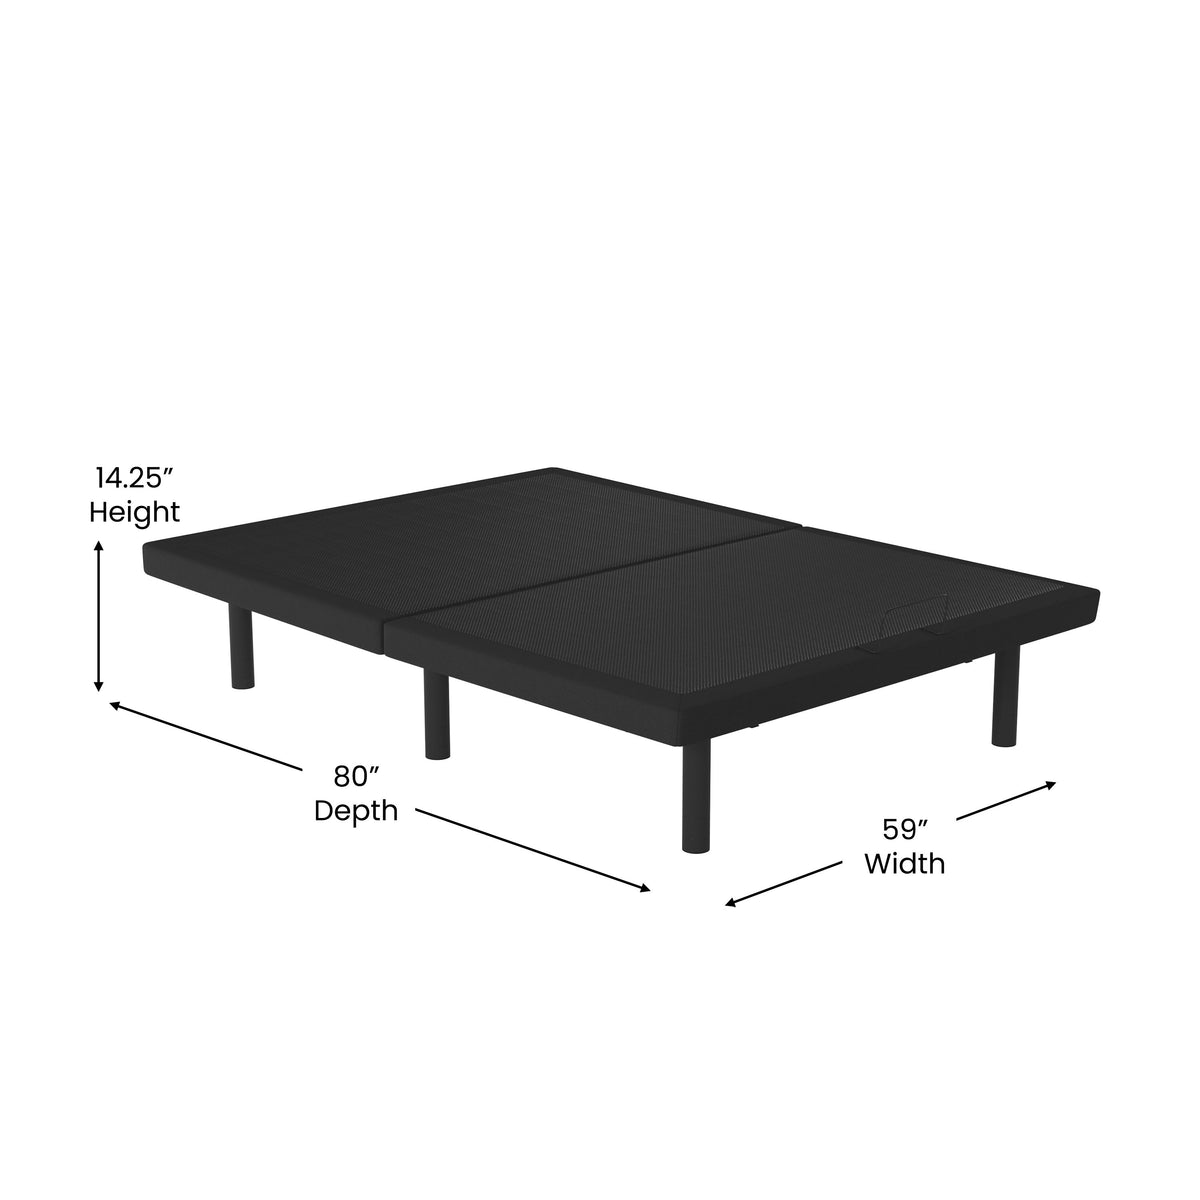 Queen |#| Anti-skid Black Upholstered Adjustable Bed Base with Wireless Remote-Queen